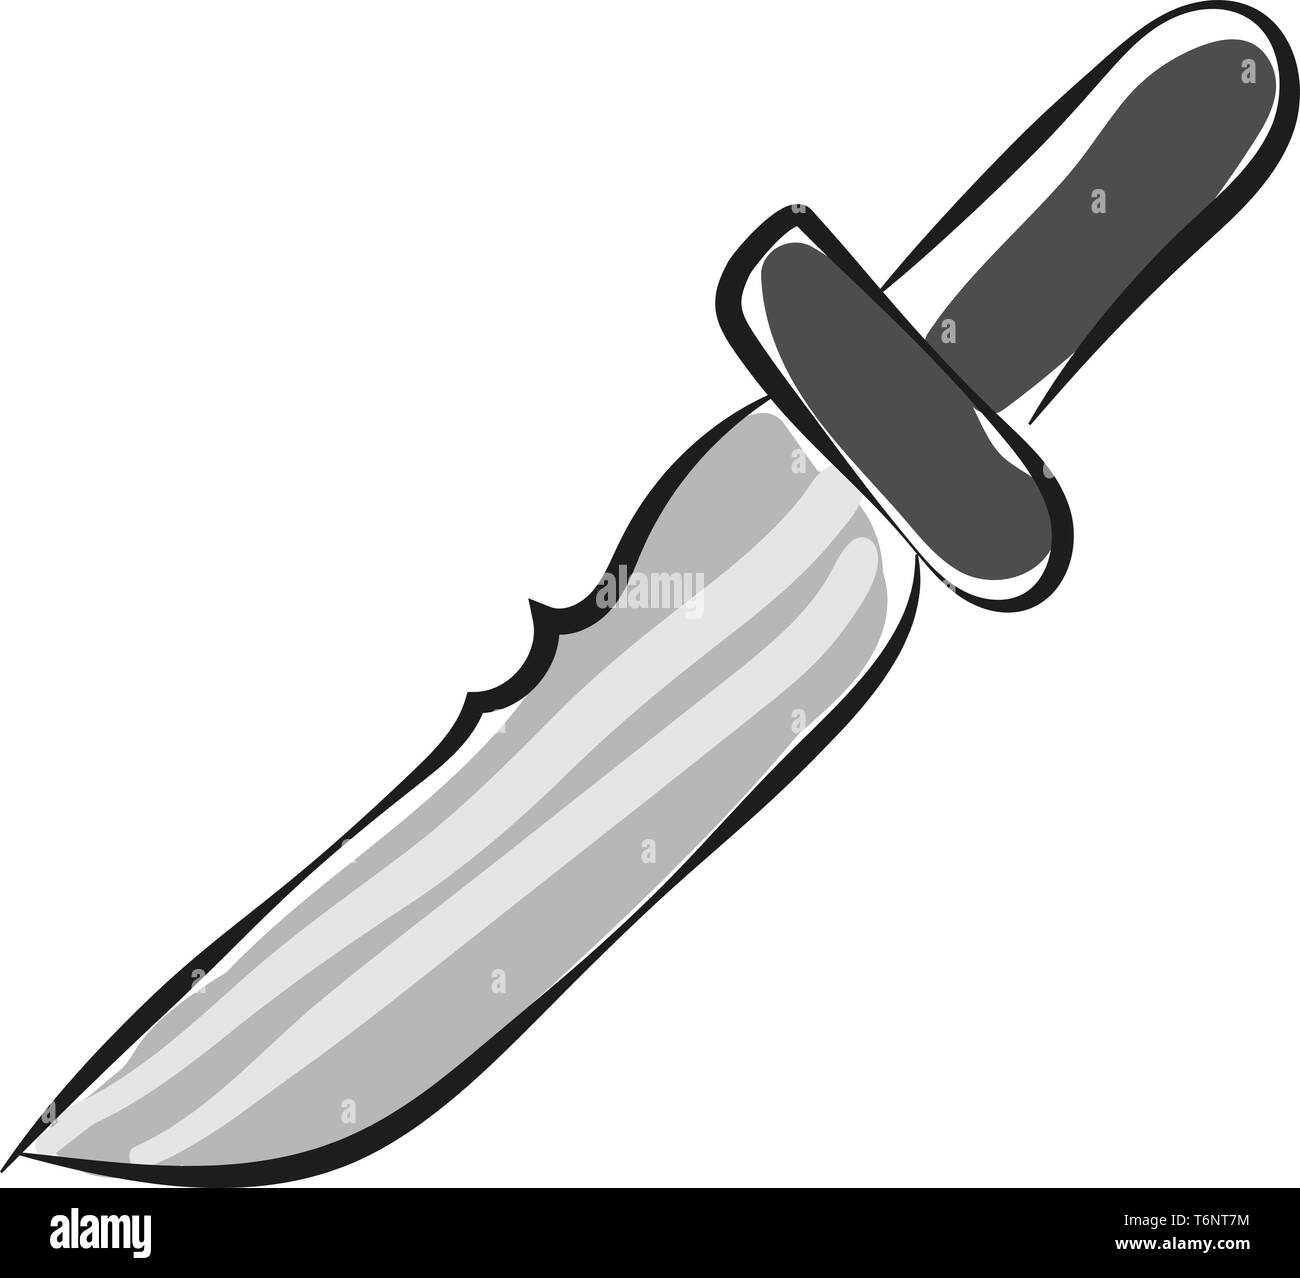 Drawing of the knife  an implement composed of a sharp  saw-like silver blade fixed into a black handle  used for cutting or as a weapon  vector  colo Stock Vector